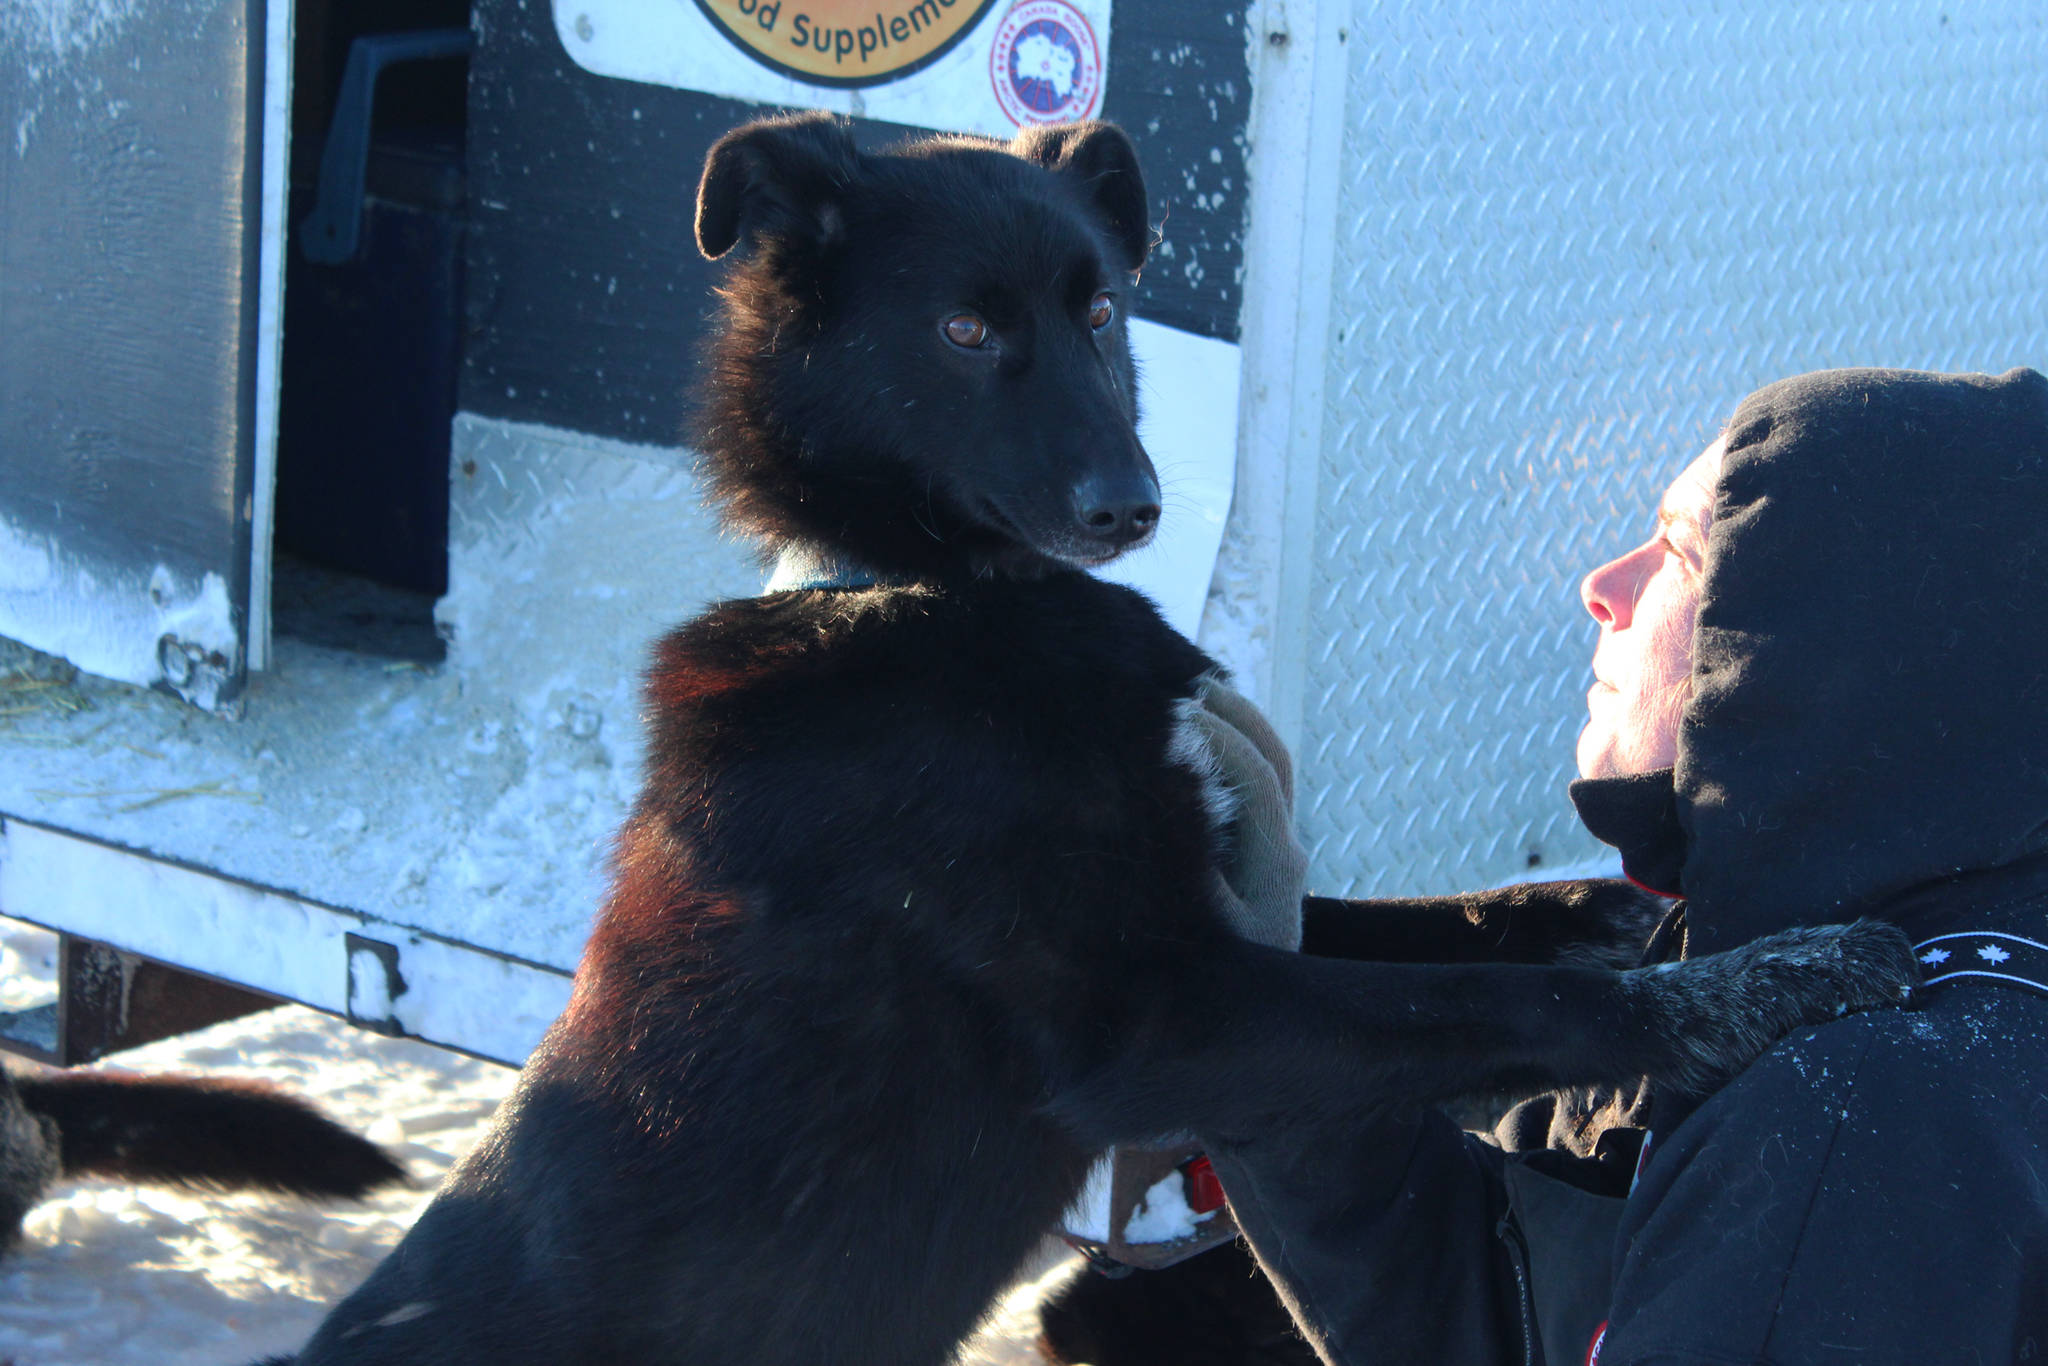 Mohawk, one of musher Lance Mackey’s dogs, takes comfort from handler Brooke Thompson before the start of this year’s Tustumena 200 Sled Dog Race on Saturday, Jan. 27, 2018 at Freddie’s Roadhouse in Ninilchik, Alaska. (Photo by Megan Pacer/Homer News)